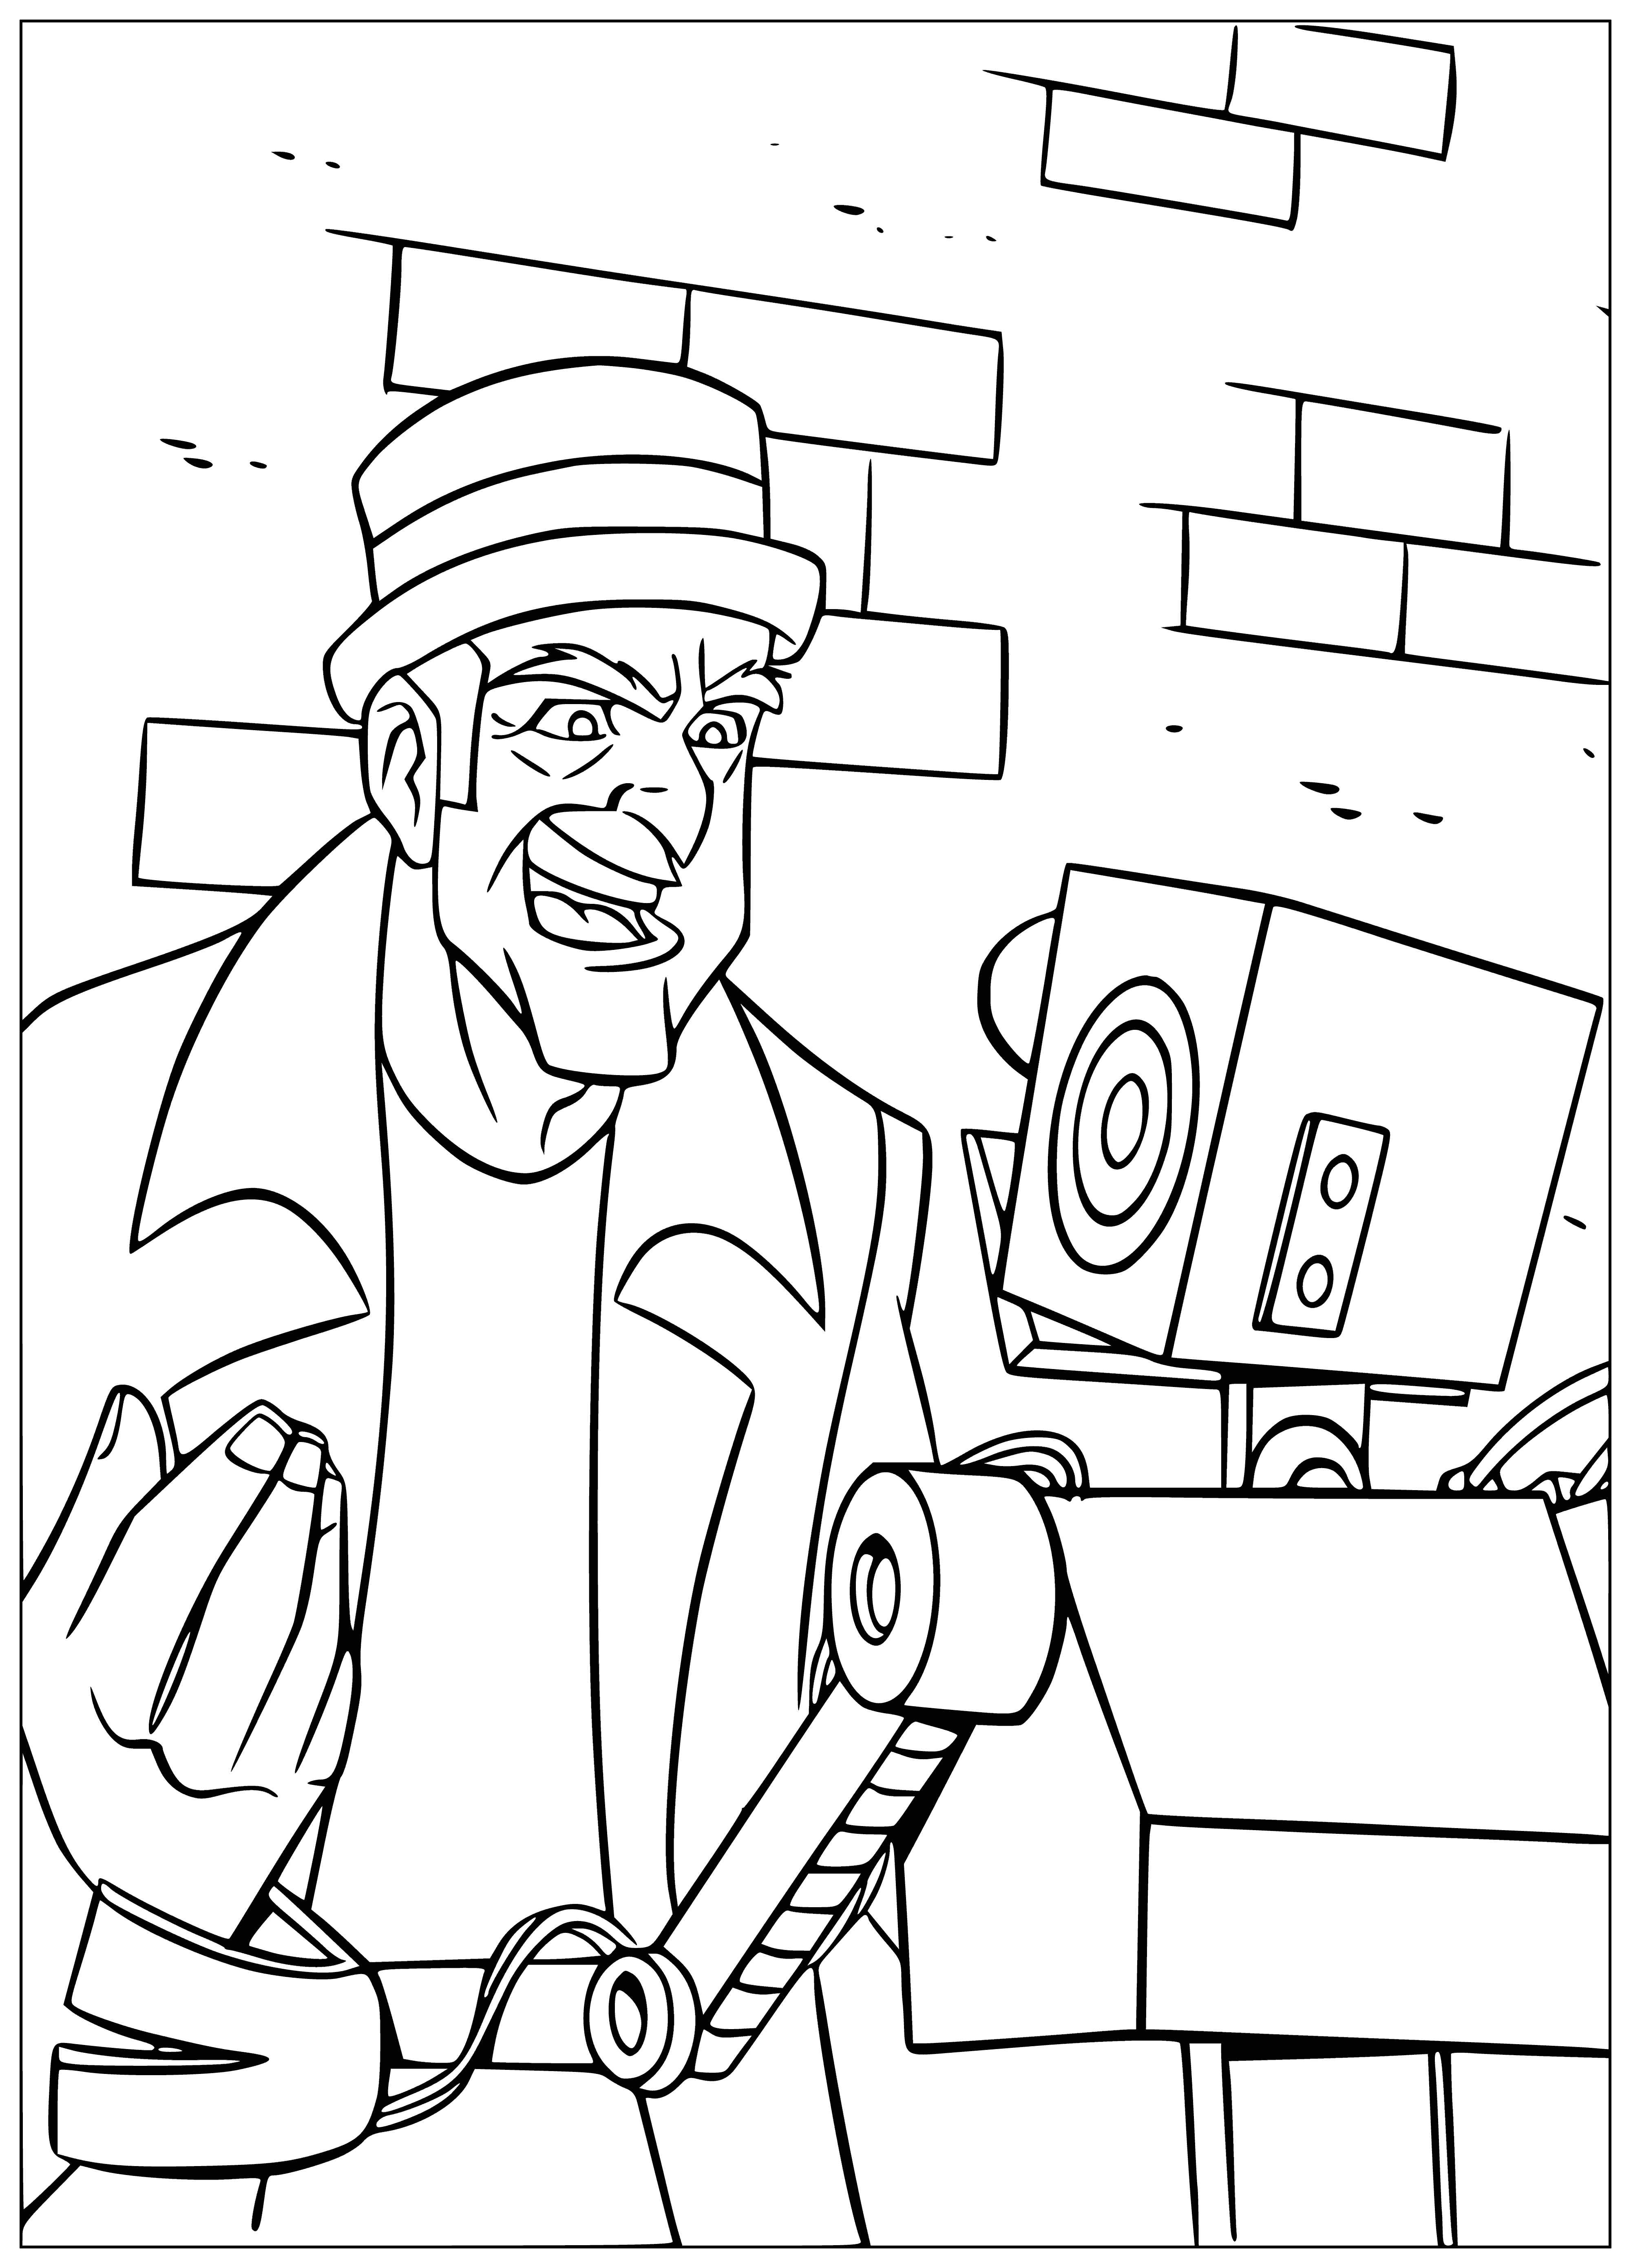 Uncle and Robot coloring page